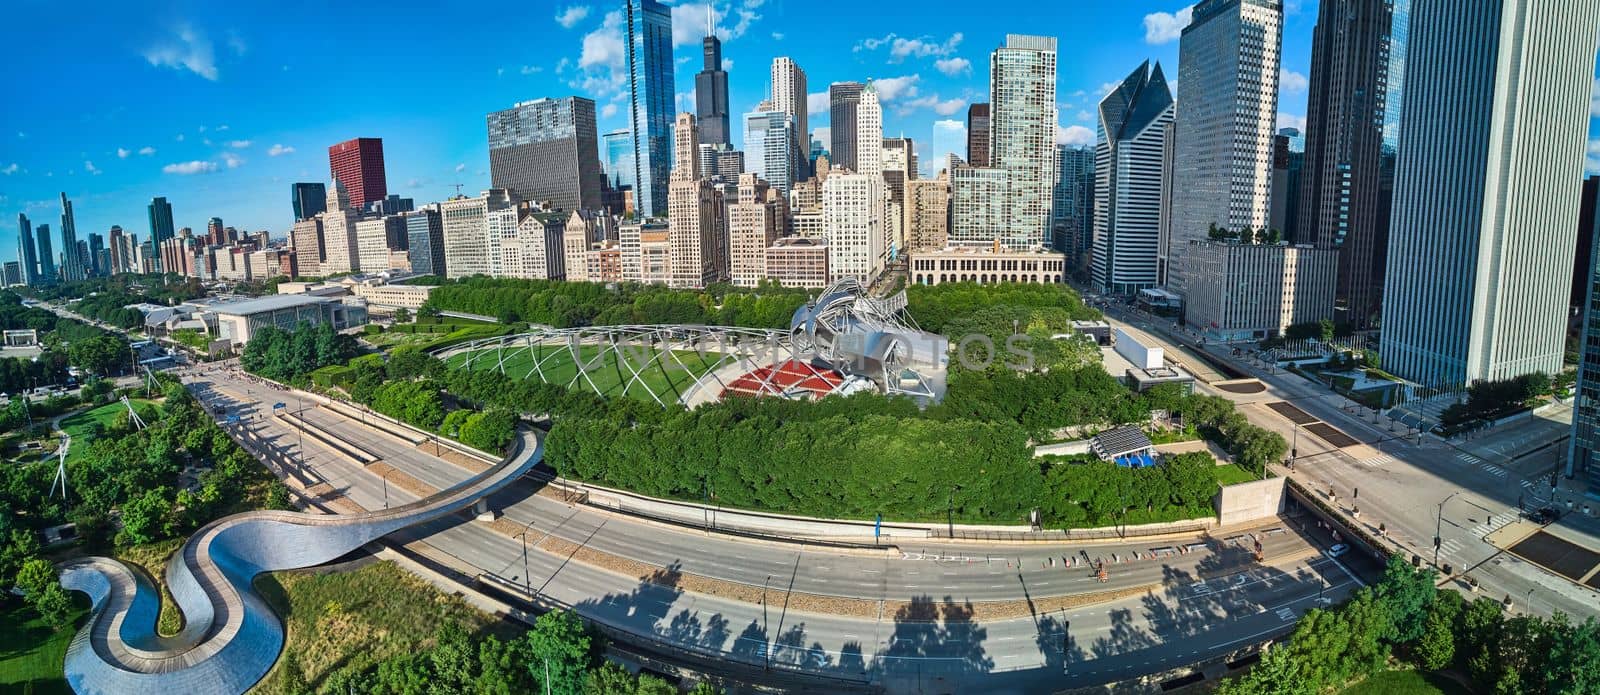 View over Millennium Park with walking bridge and theater in downtown Chicago lined with skyscrapers by njproductions